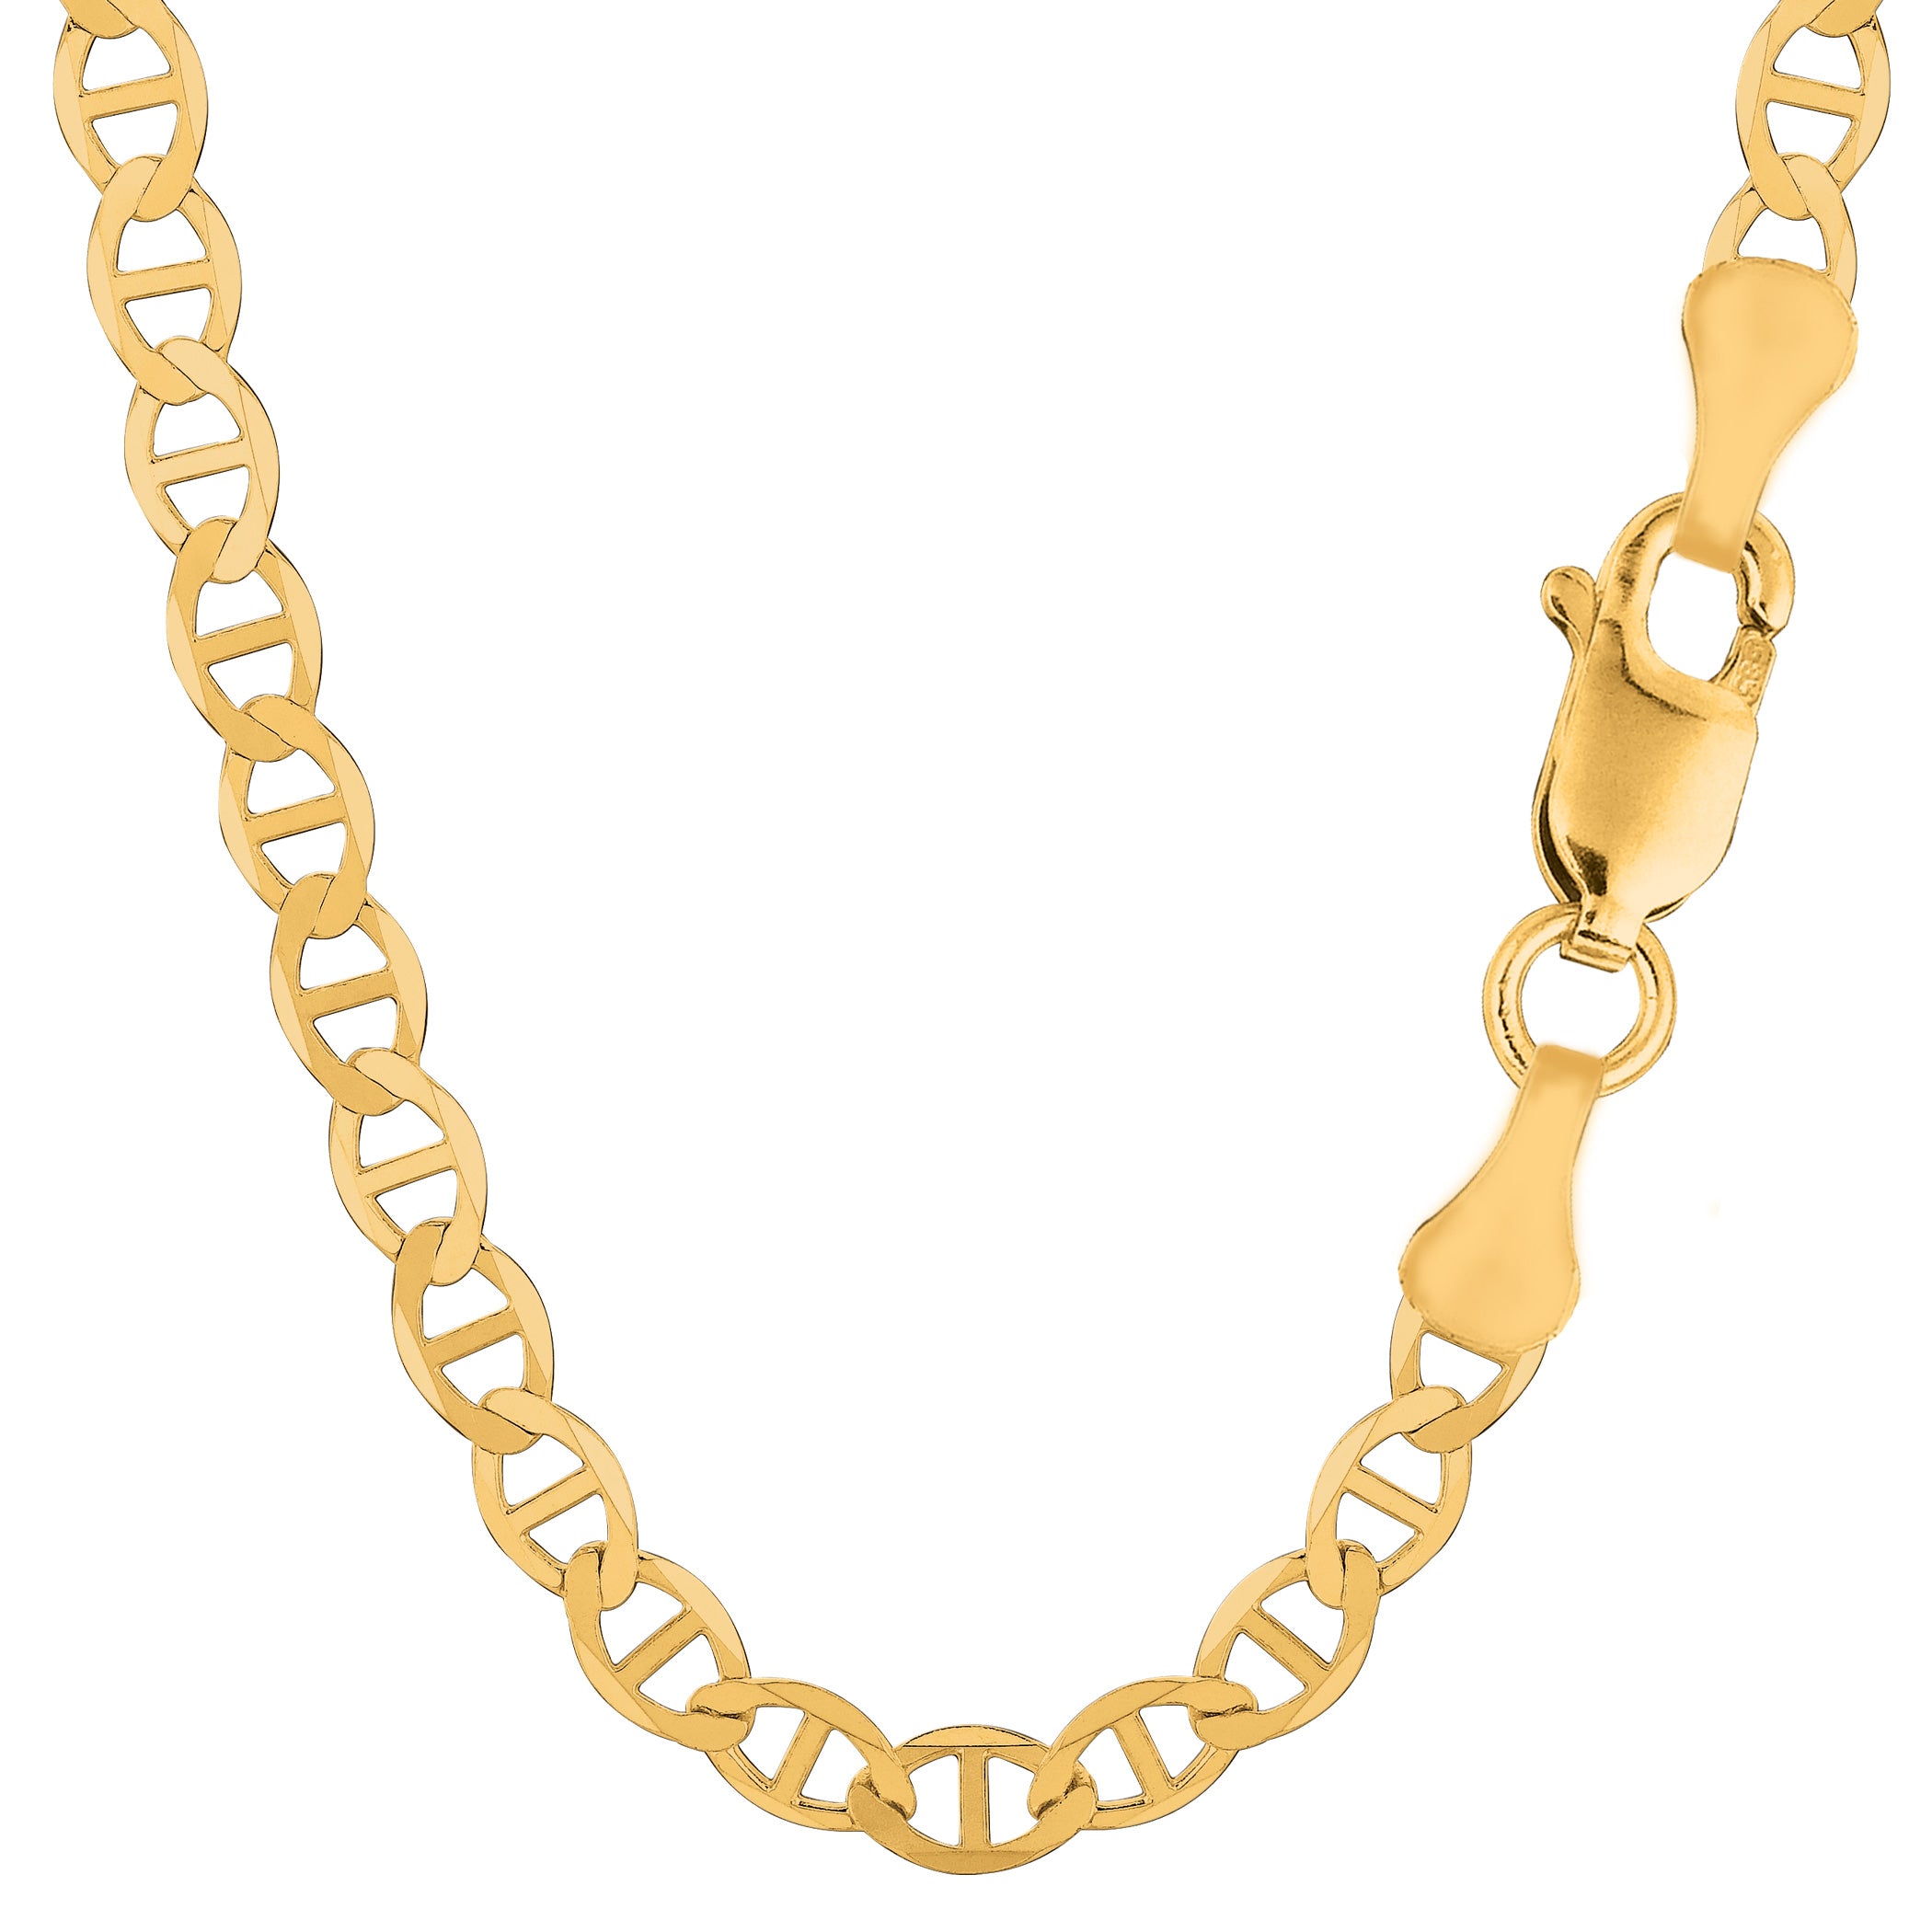 Mariner Link Chain Necklace in 14K Yellow Gold